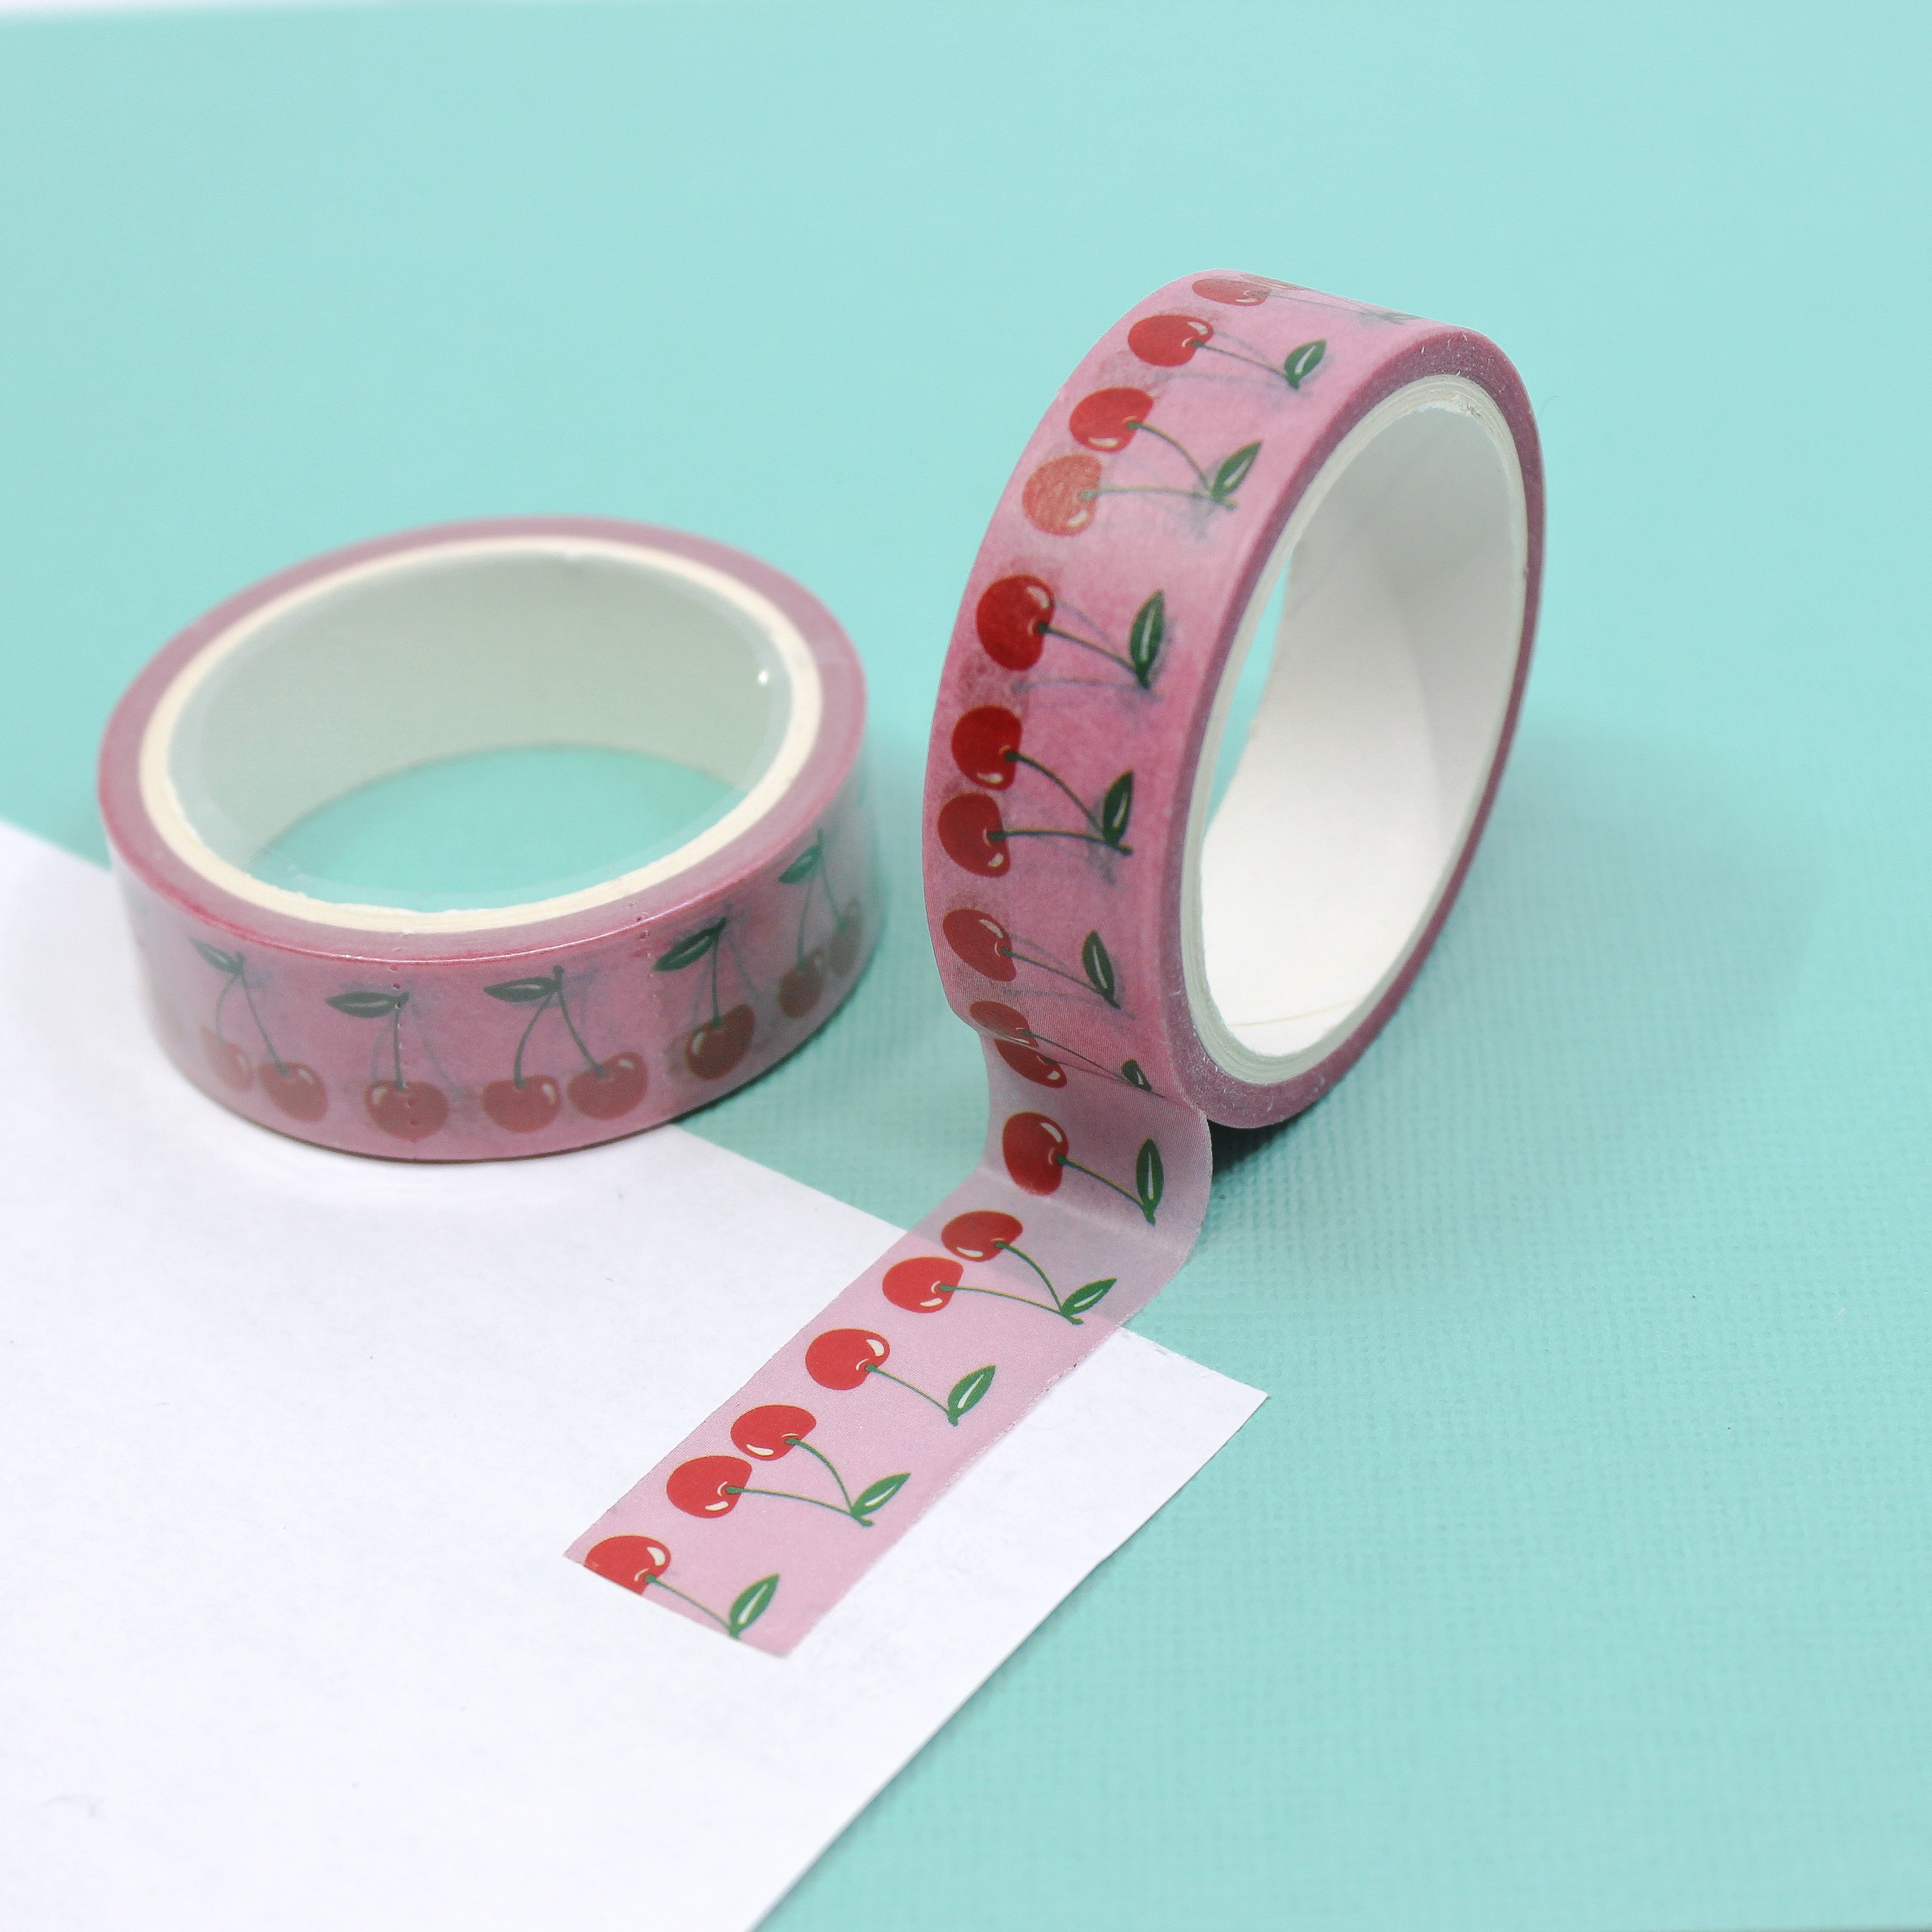 This is a cute cherry bomb view themed washi tape from BBB Supplies Craft Shop